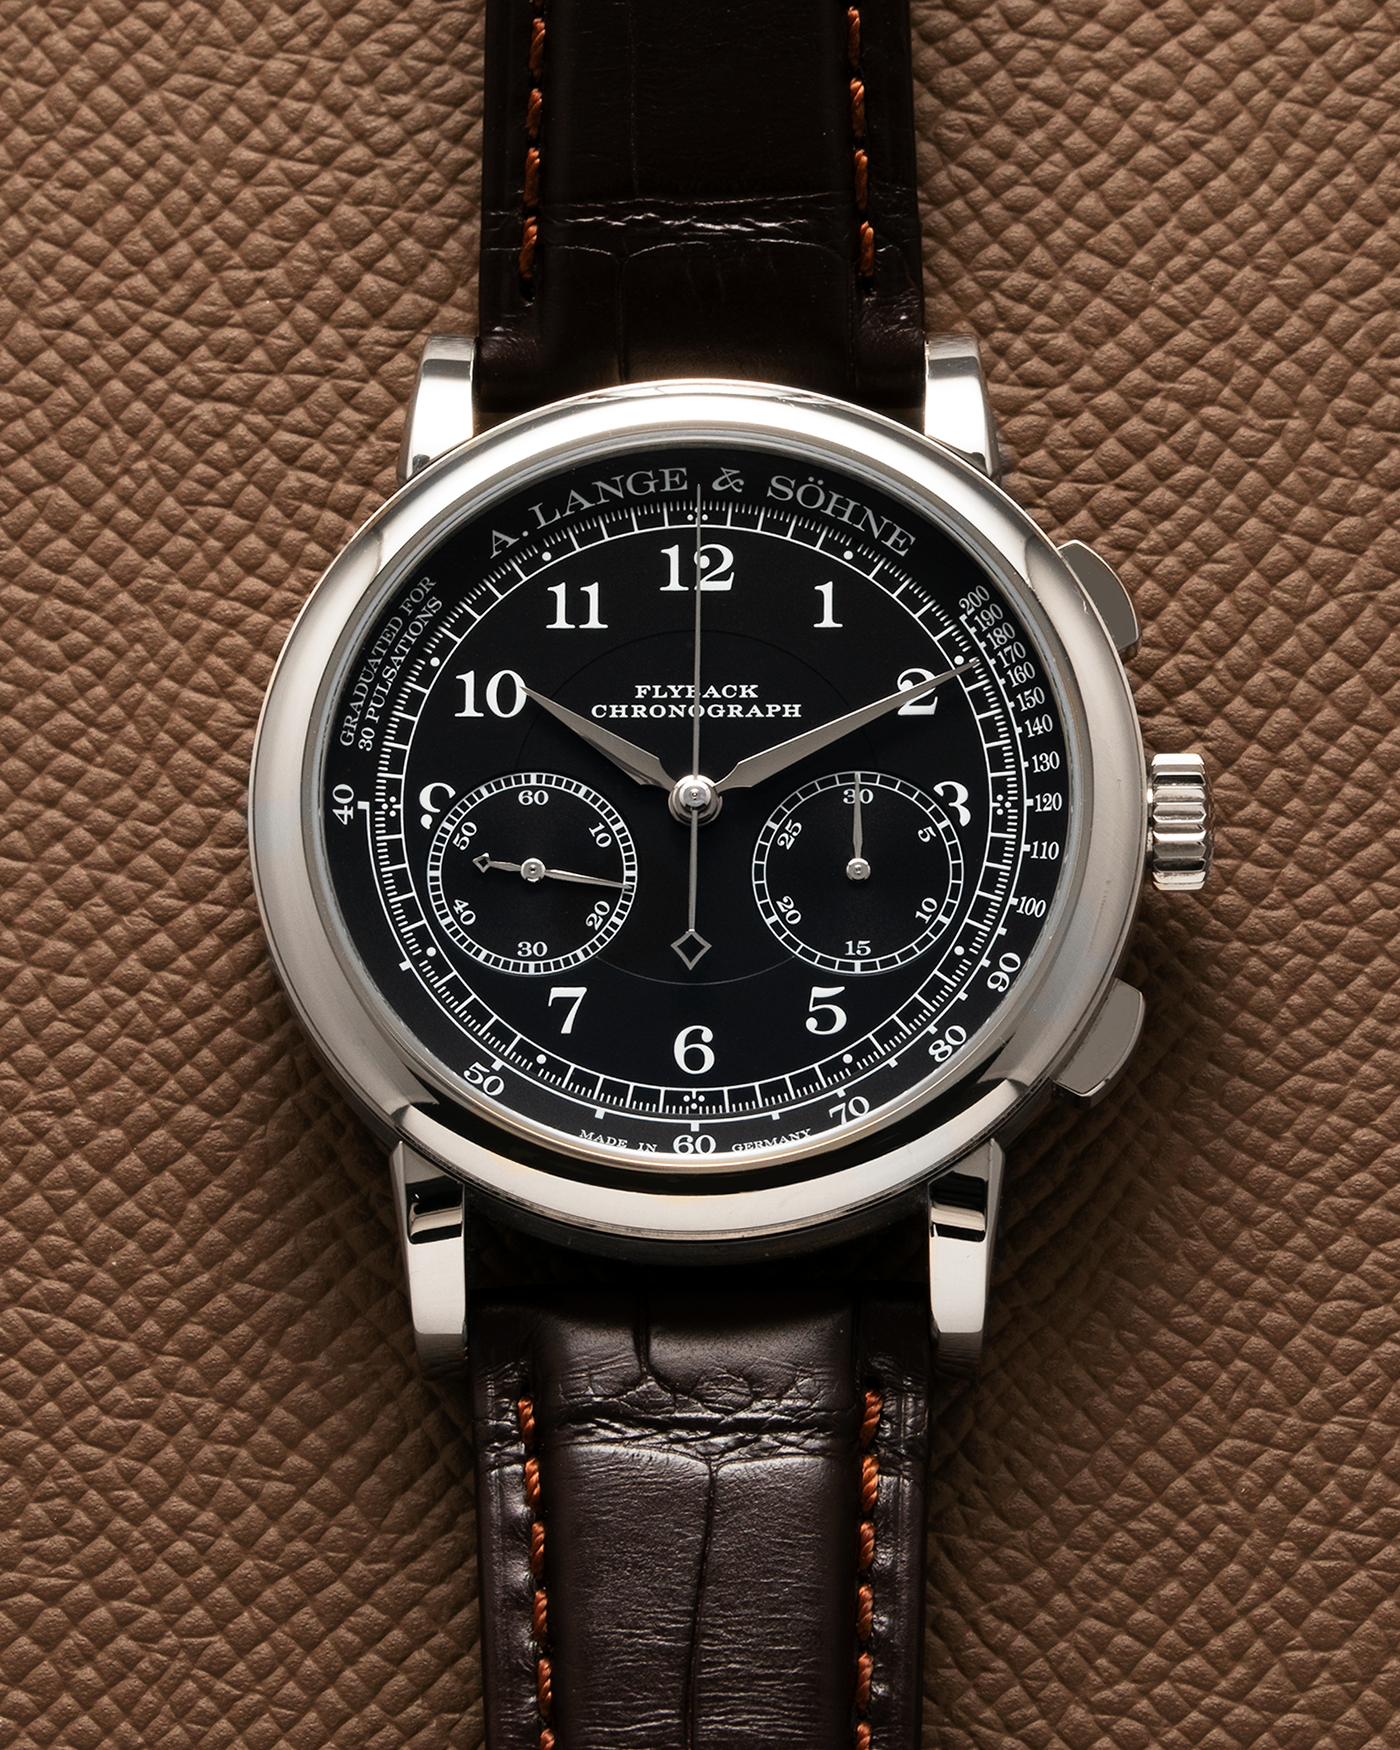 Brand: A. Lange & Söhne Year: 2022 Model: 1815 Chronograph Reference: 414.028 Material: 18-carat White Gold Movement: Cal. L951.5, Manual-Winding Case Diameter: 39.5mm Bracelet/Strap: A. Lange & Söhne Dark Brown Alligator Strap with signed 18-carat White Gold Tang Buckle